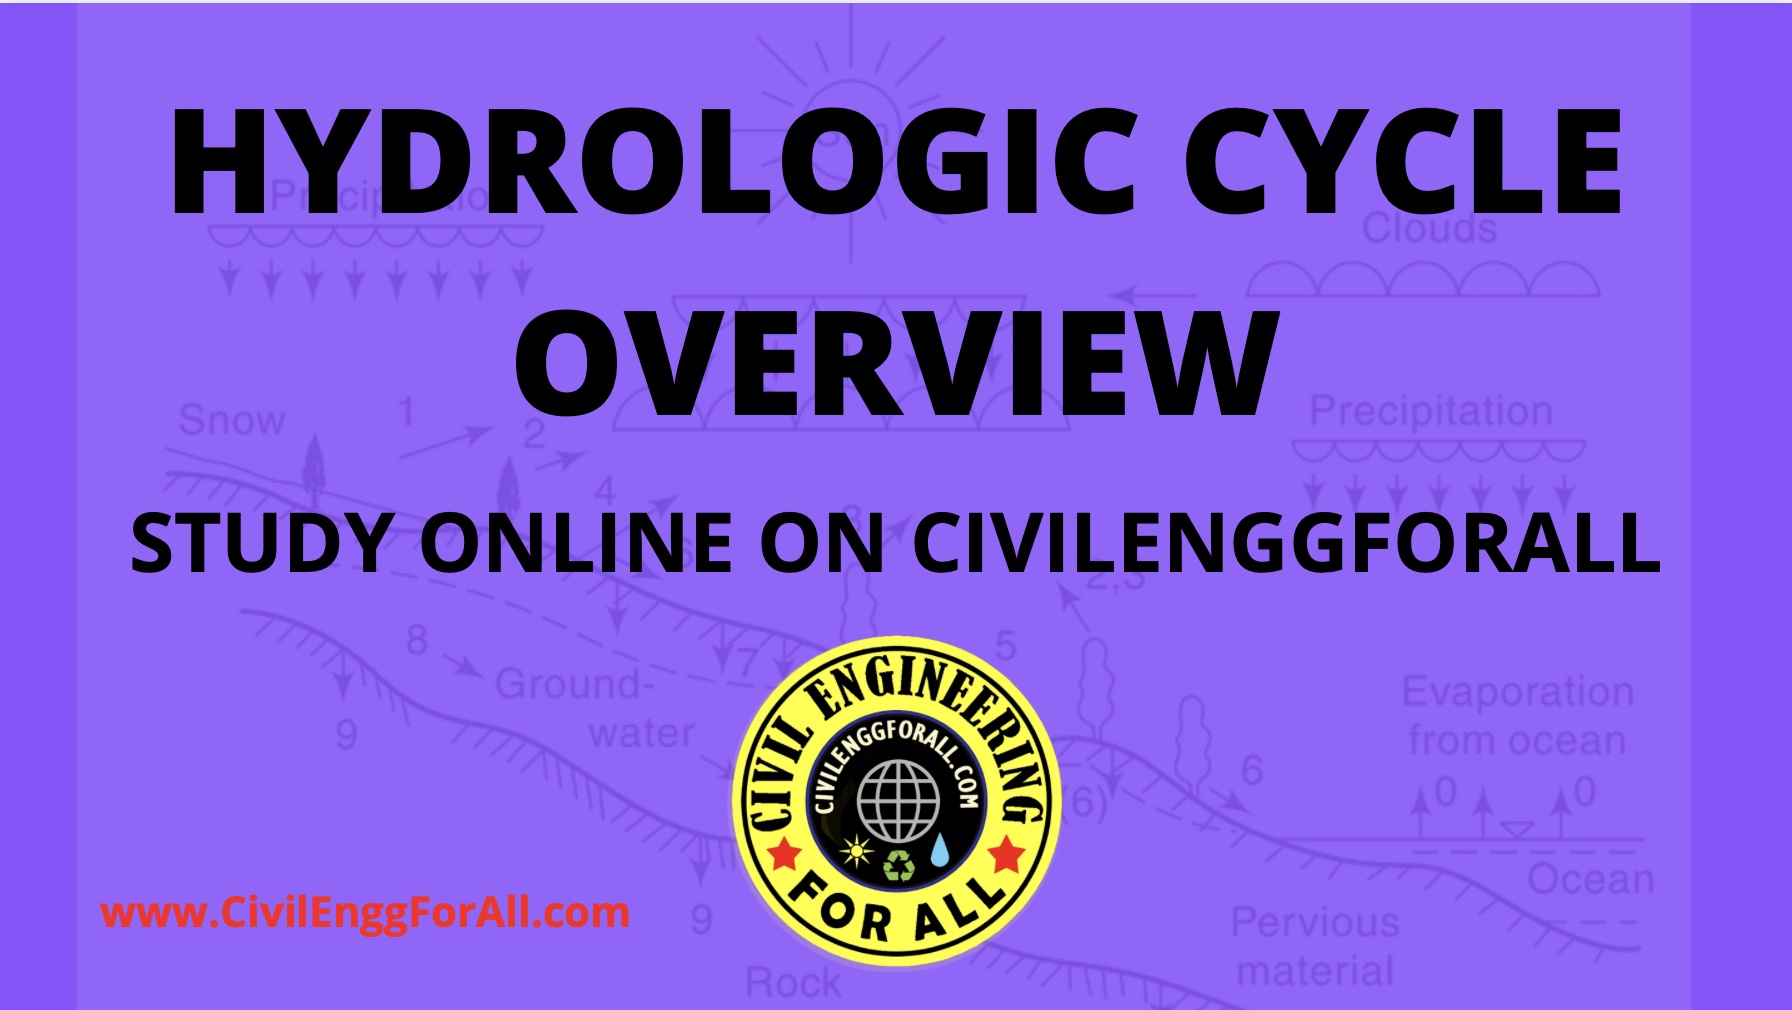 Hydrologic Cycle Overview - Study Online - Civil Engineering For All